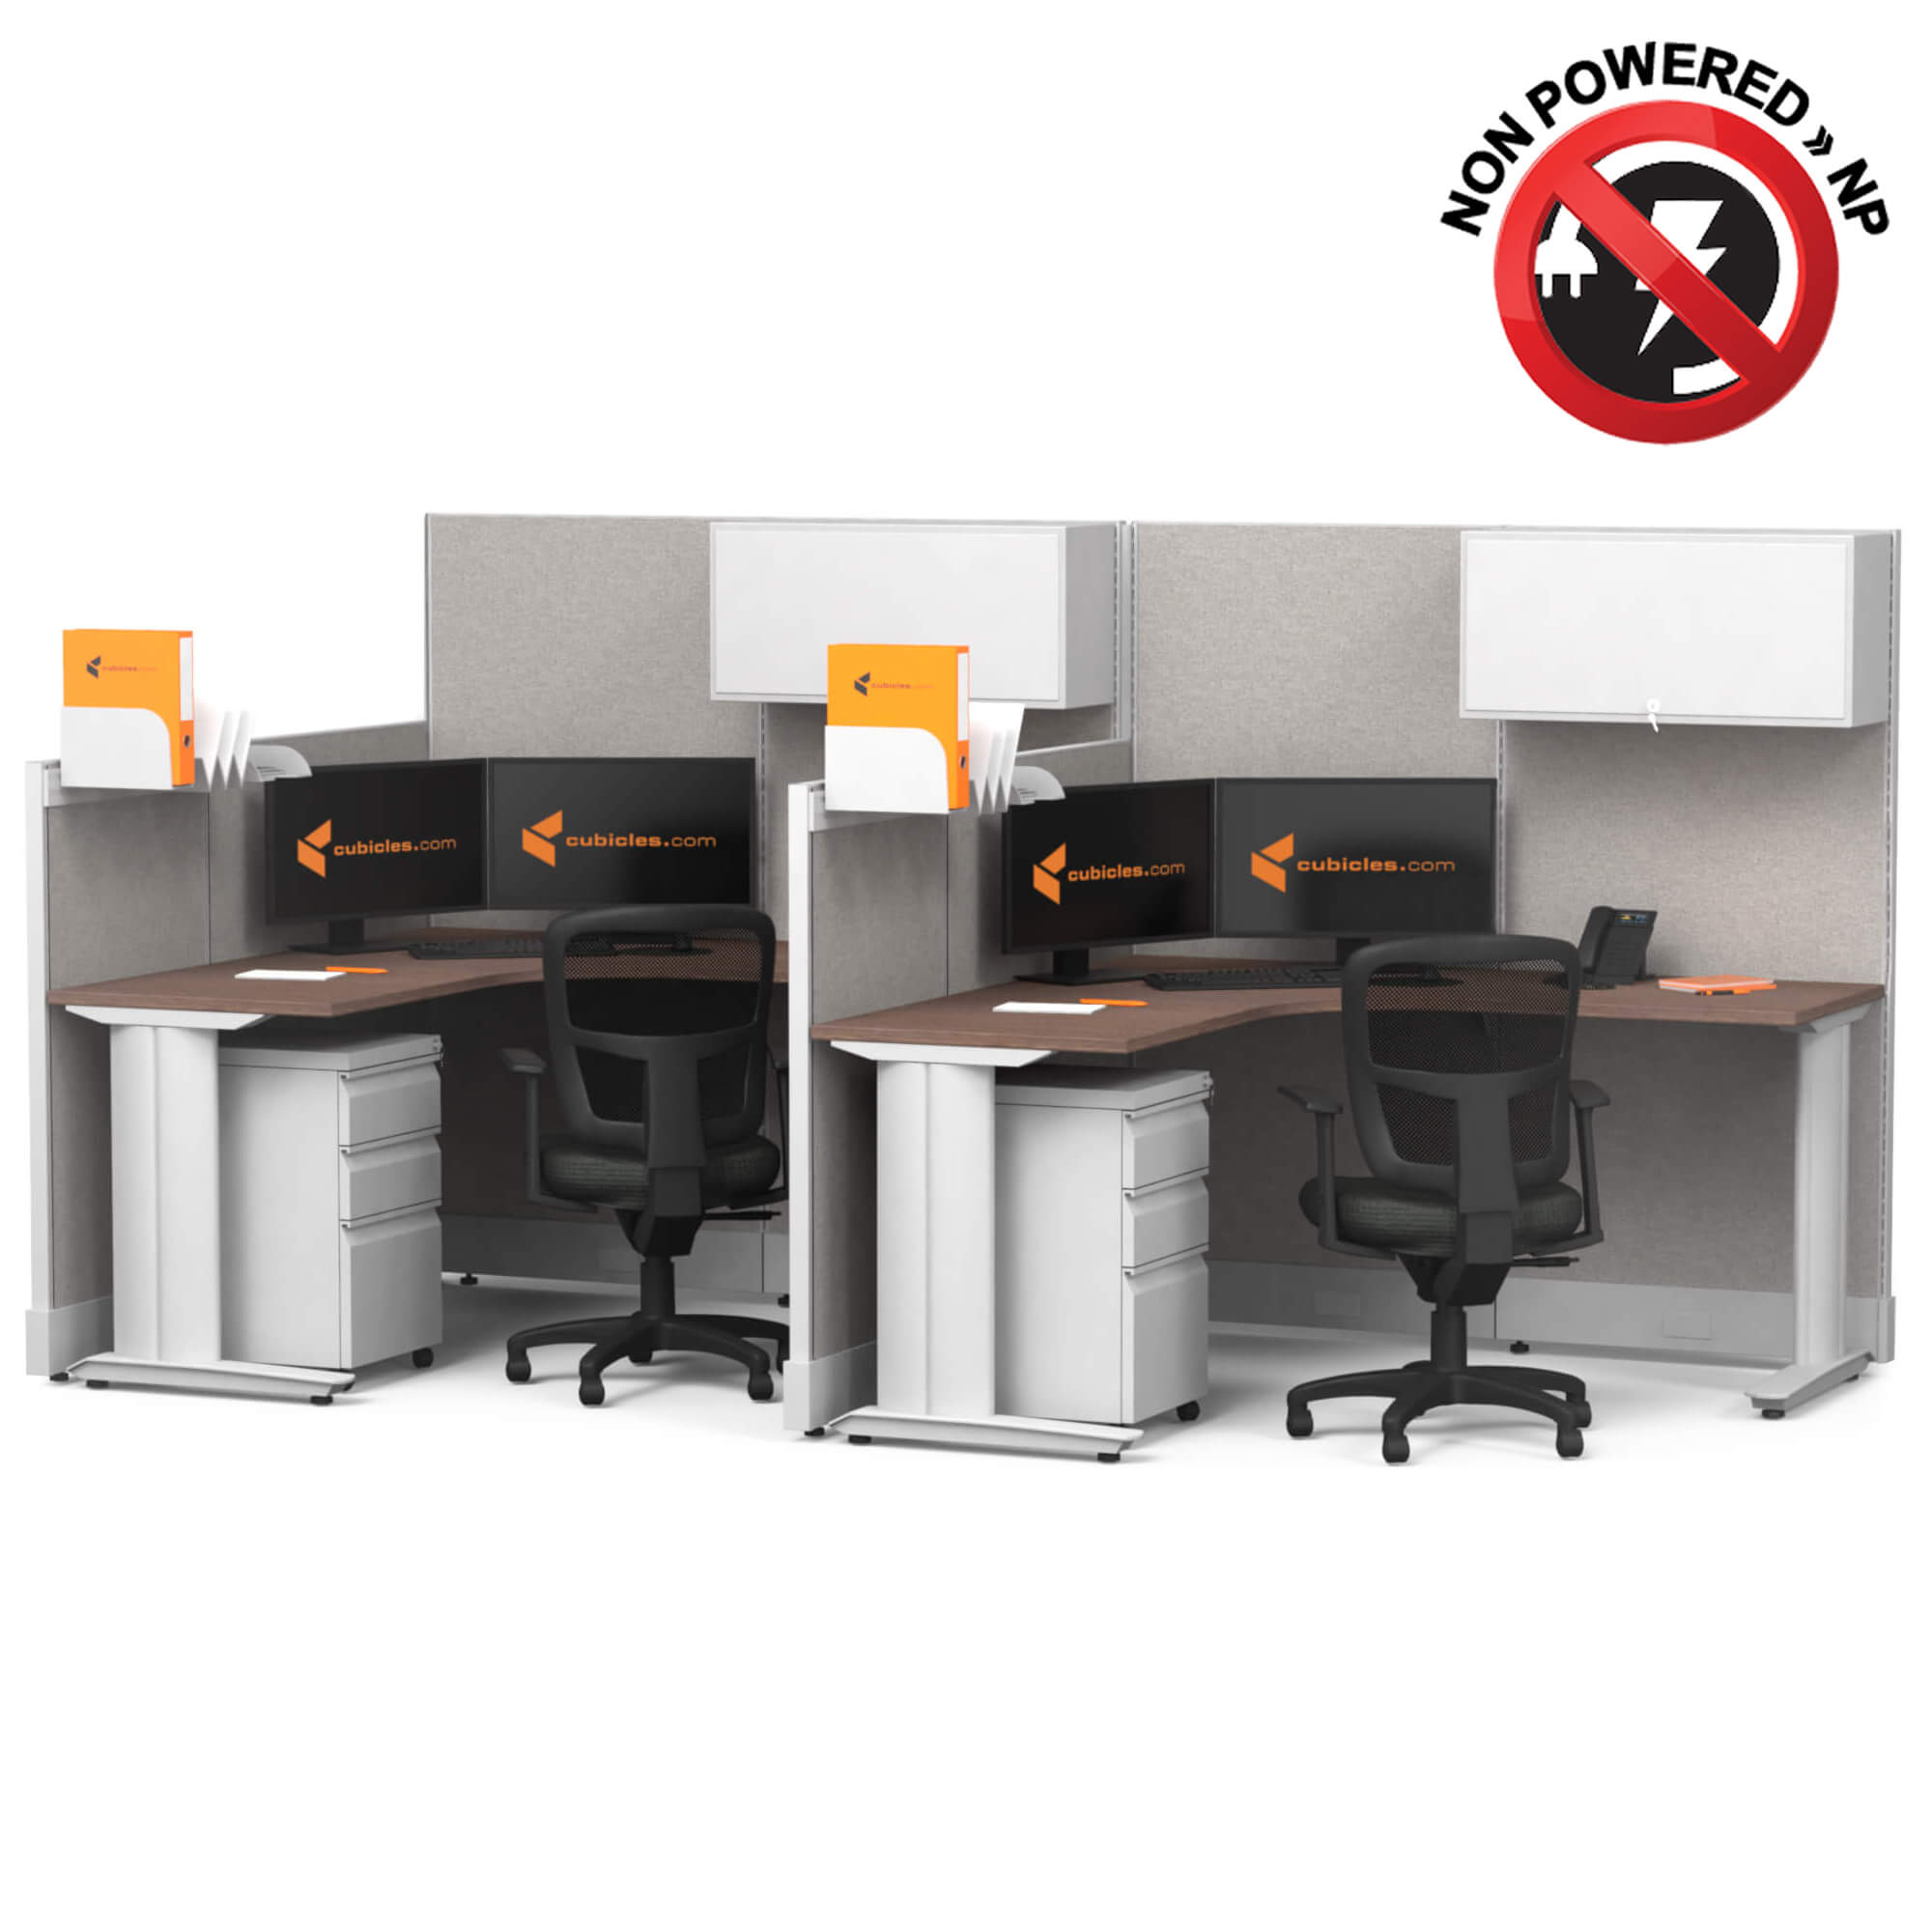 cubicle-desk-l-shaped-with-storage-2pack-non-powered.jpg